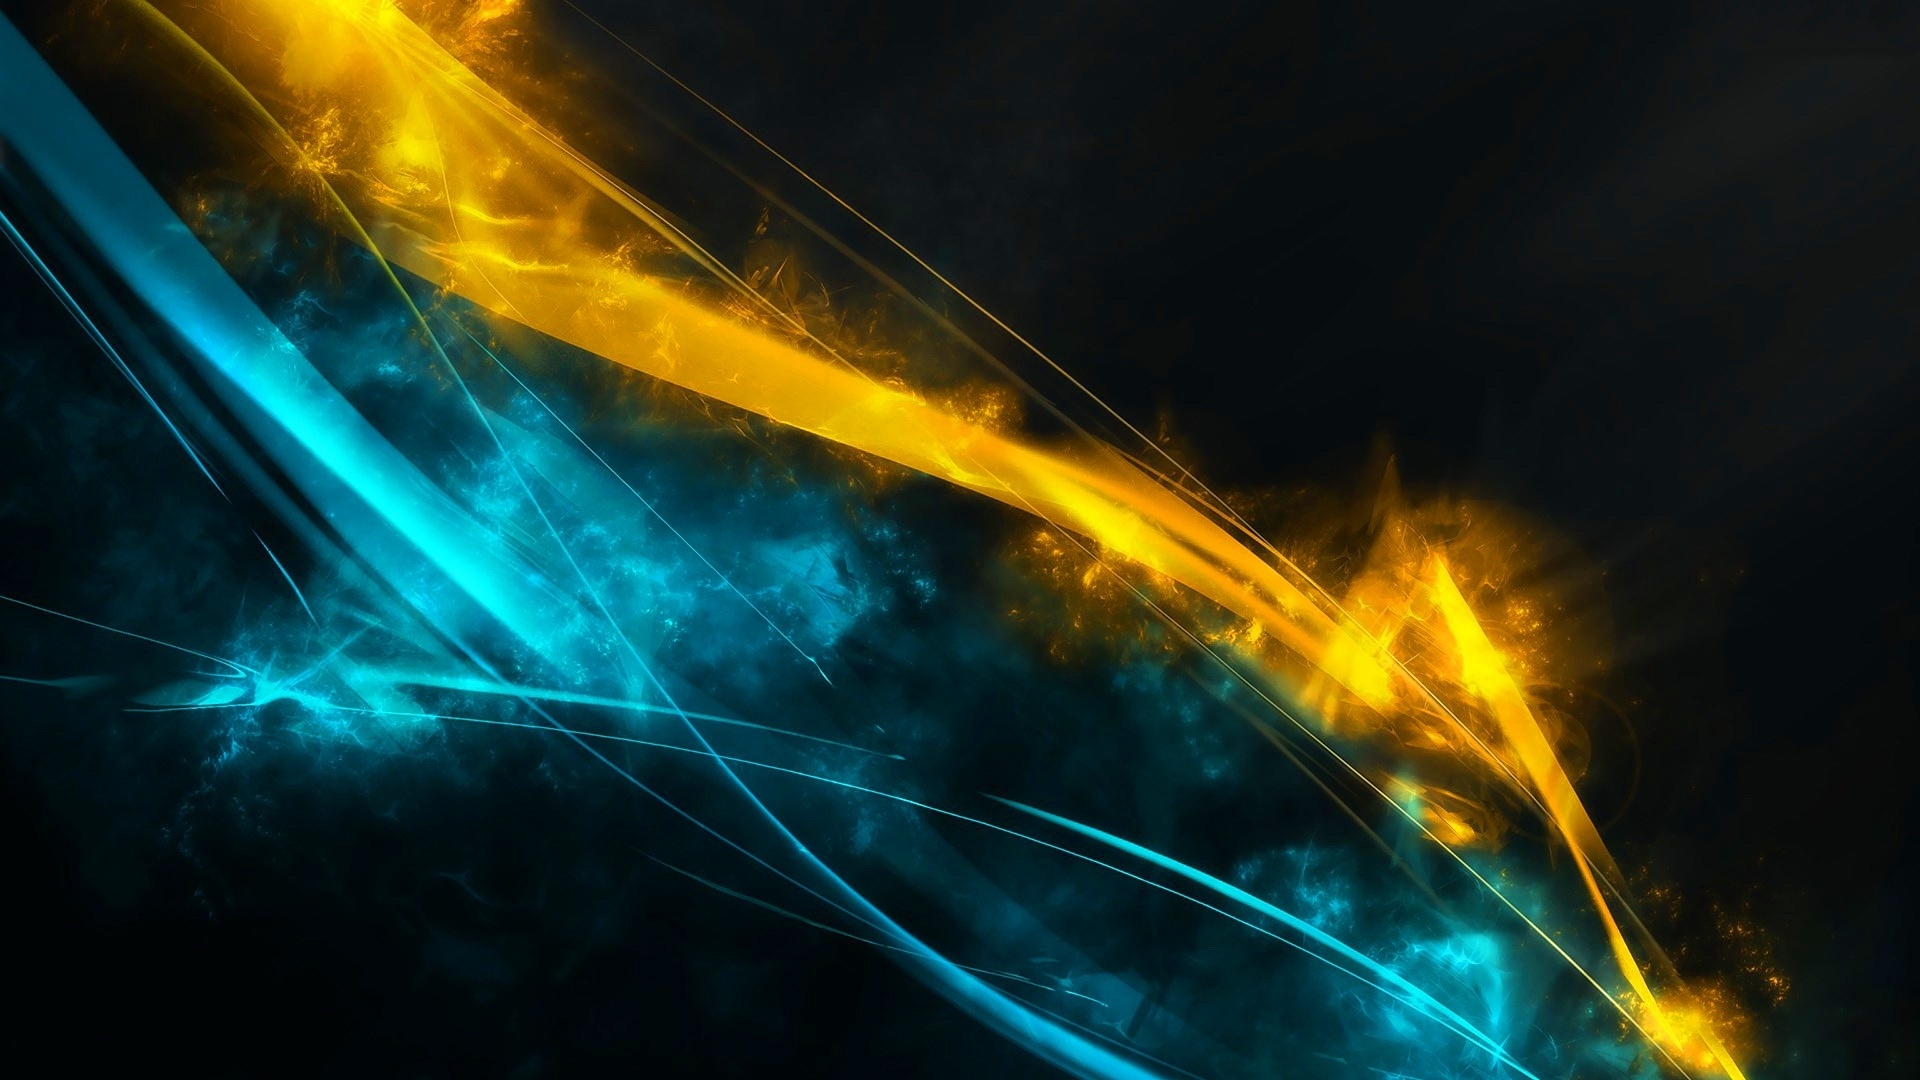 Blue And Gold Wallpaper